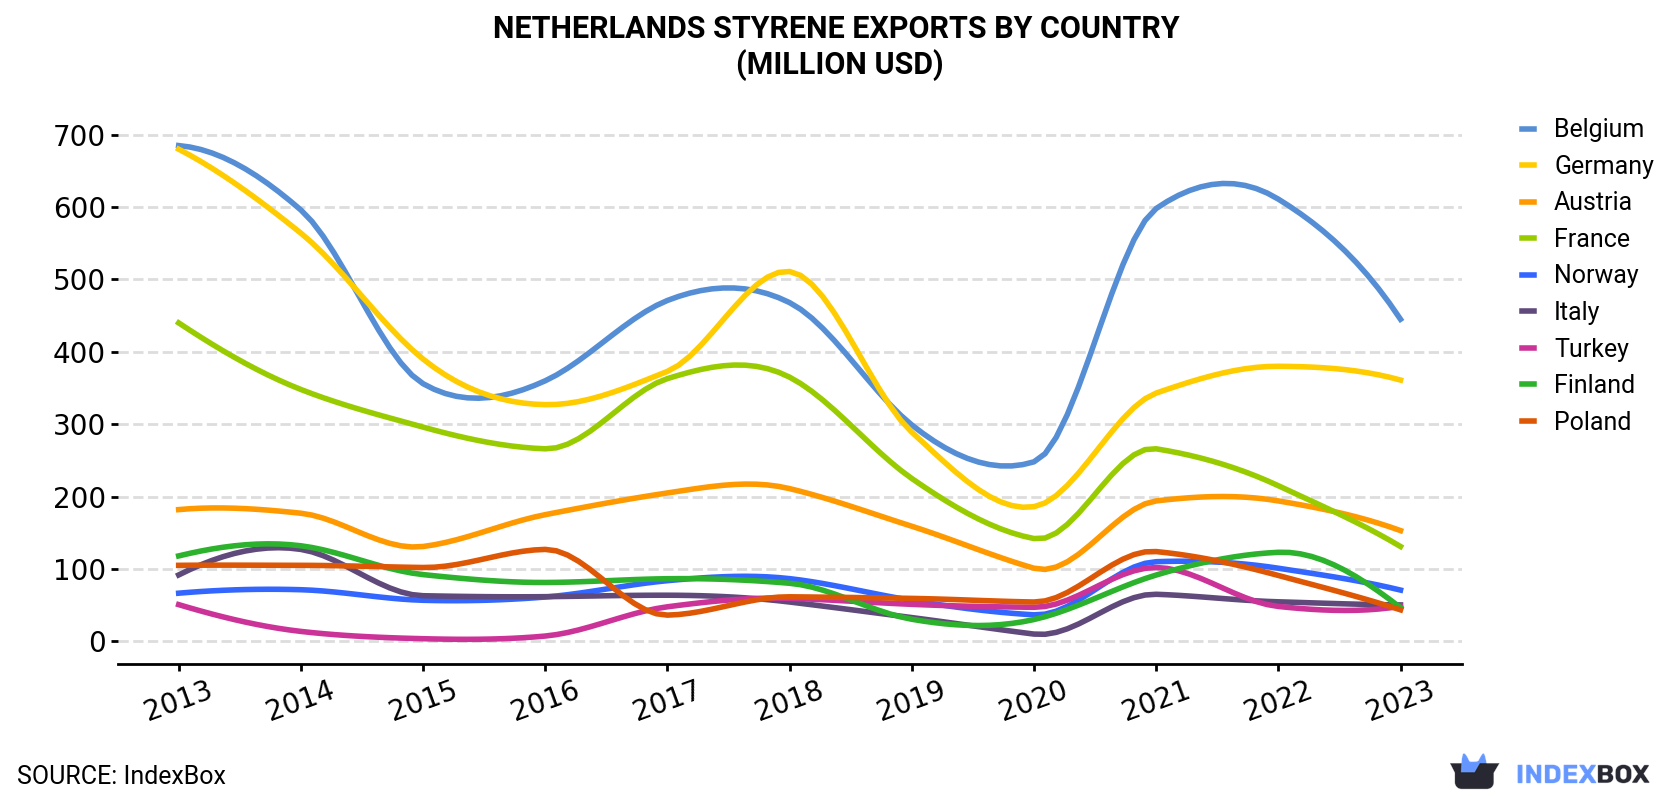 Netherlands Styrene Exports By Country (Million USD)